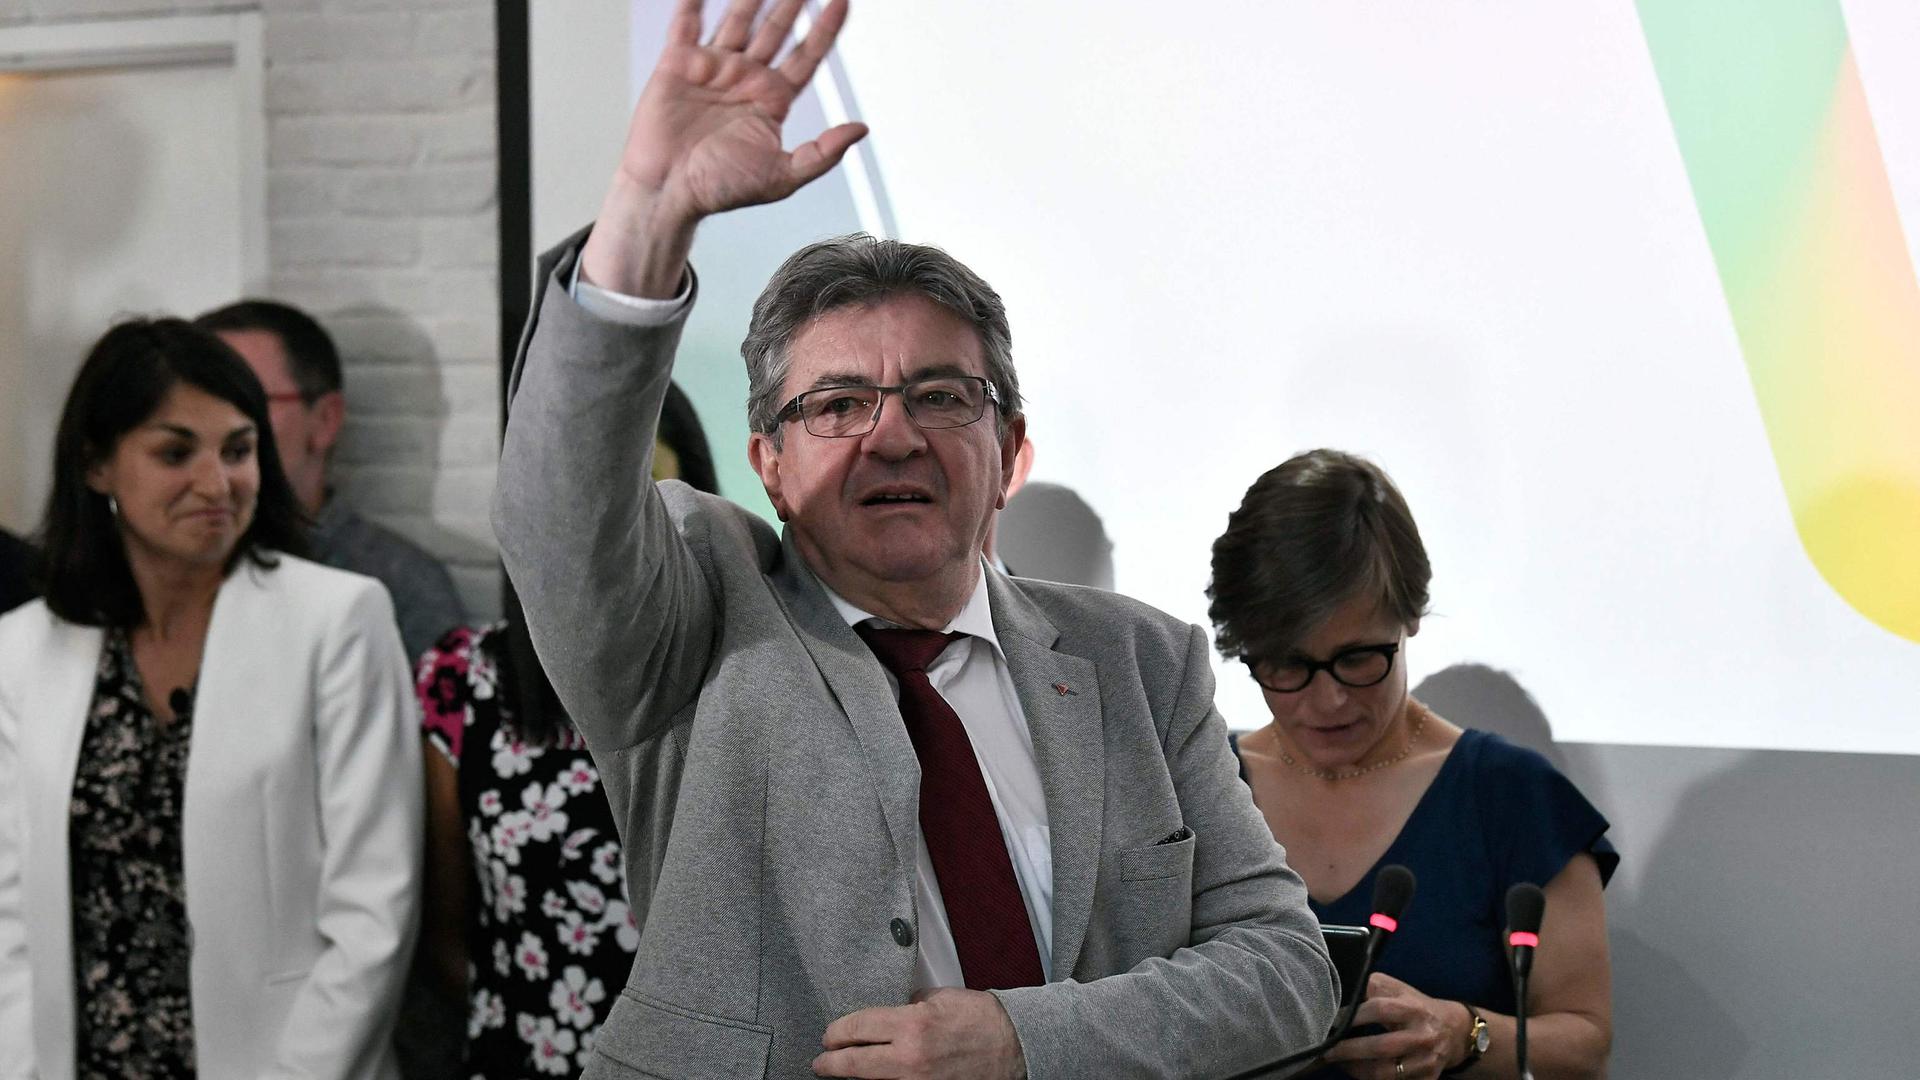 France's leftist La France Insoumise (LFI) party leader, Member of Parliament and leader of left-wing coalition Nupes (Nouvelle Union Populaire Ecologique et Sociale - New Ecologic and Social People's Union) Jean-Luc Melenchon waves during the election evening at the Nupes headquarters, following the first round of France's parliamentary elections in Paris, on June 12, 2022. - The united left (25% to 26.2%) and President Macron's camp (25% to 25.8%) came neck and neck in the first round of legislative elections on June 12, 2022, against a backdrop of record abstention (52.1% to 52.8%), opening up the game for the second round in a week. (Photo by STEPHANE DE SAKUTIN / AFP)